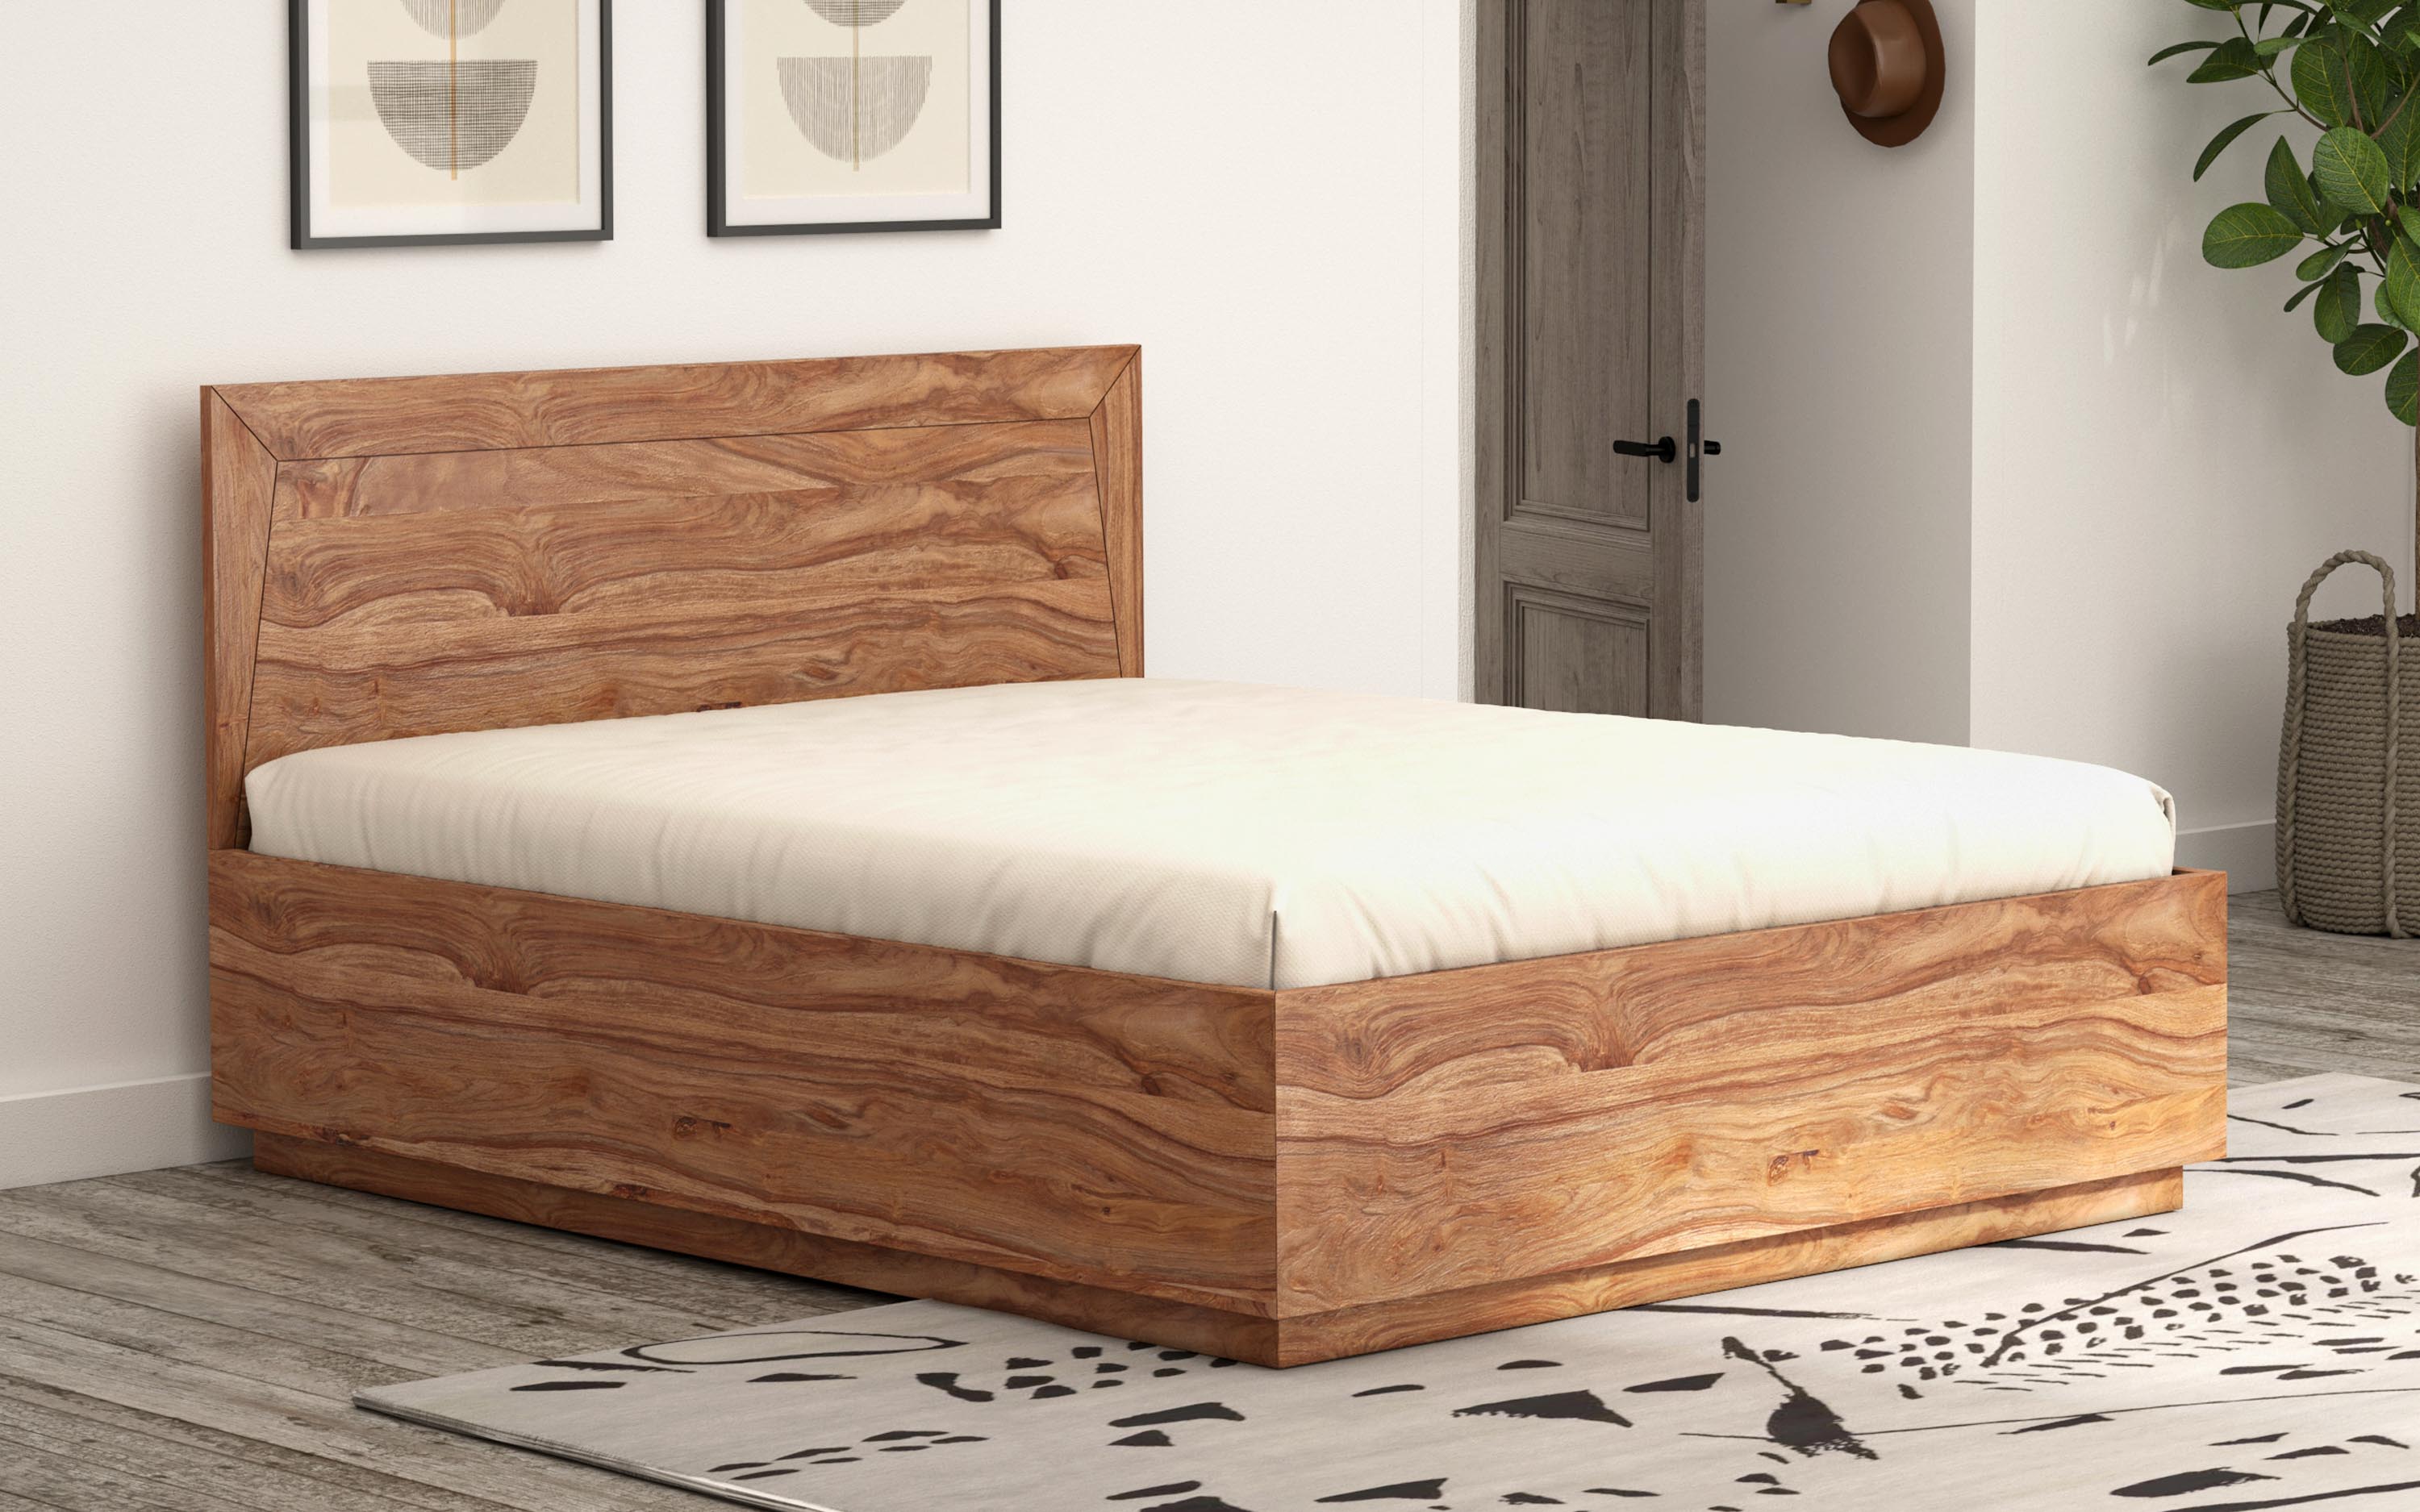 Simple framed wooden headboard showcasing natural wood grain, offering a rustic and inviting appeal for a serene bedroom environment.